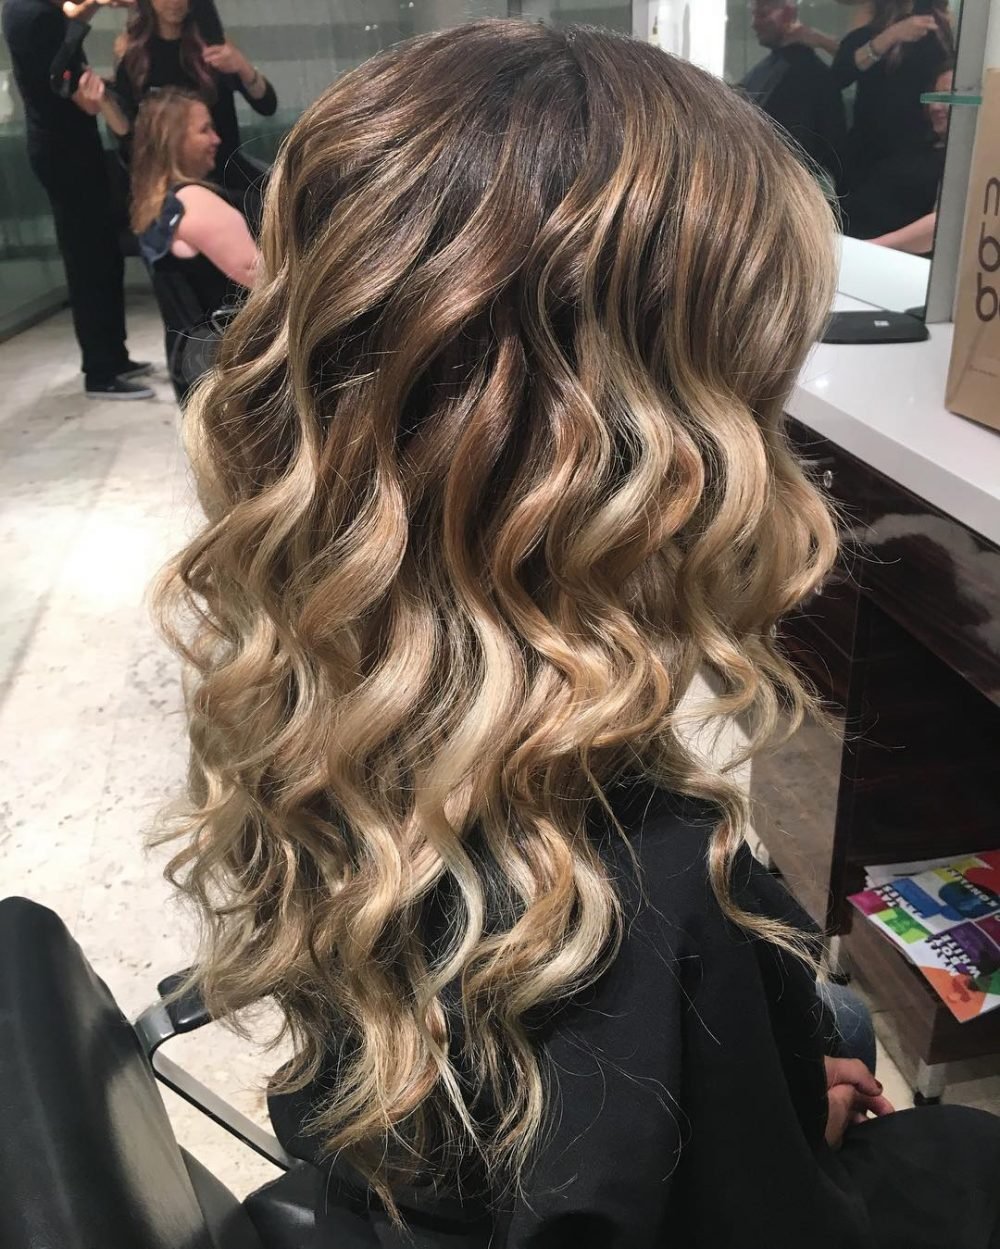 Waterfall Curls hairstyle